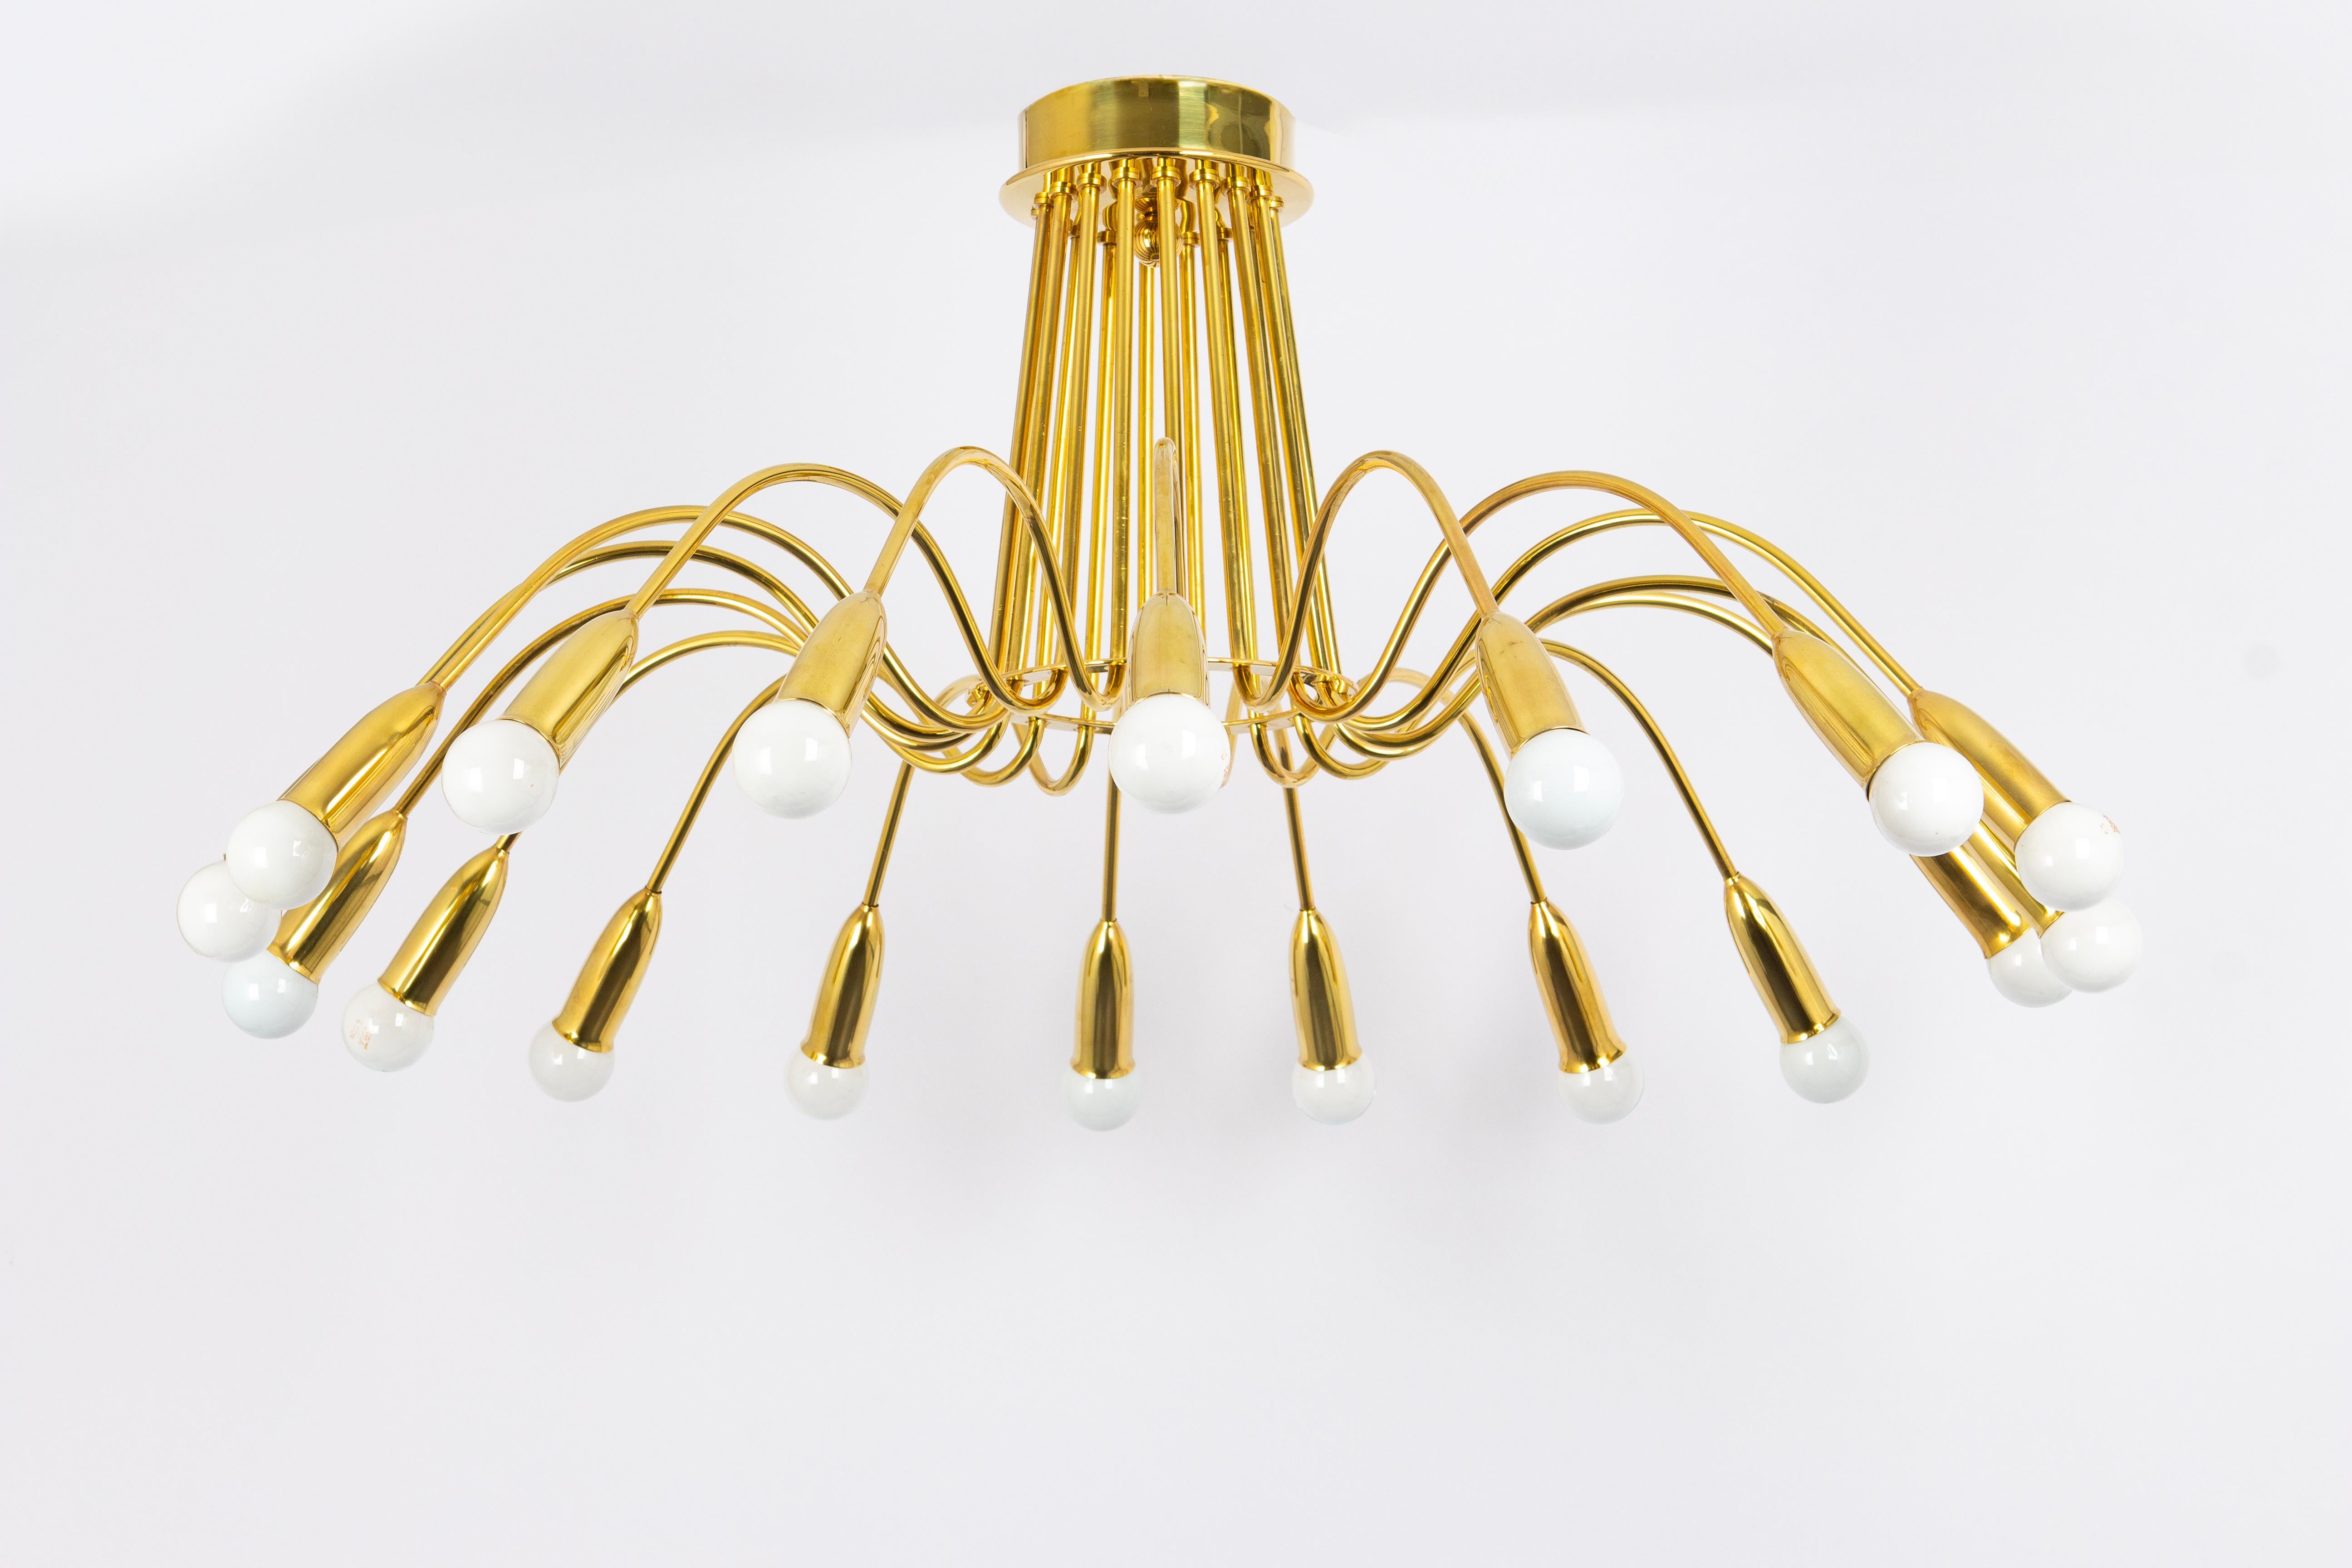 Mid-20th Century Stunning Huge Chandelier, Brass in style of Kaiser, Germany, 1960s For Sale